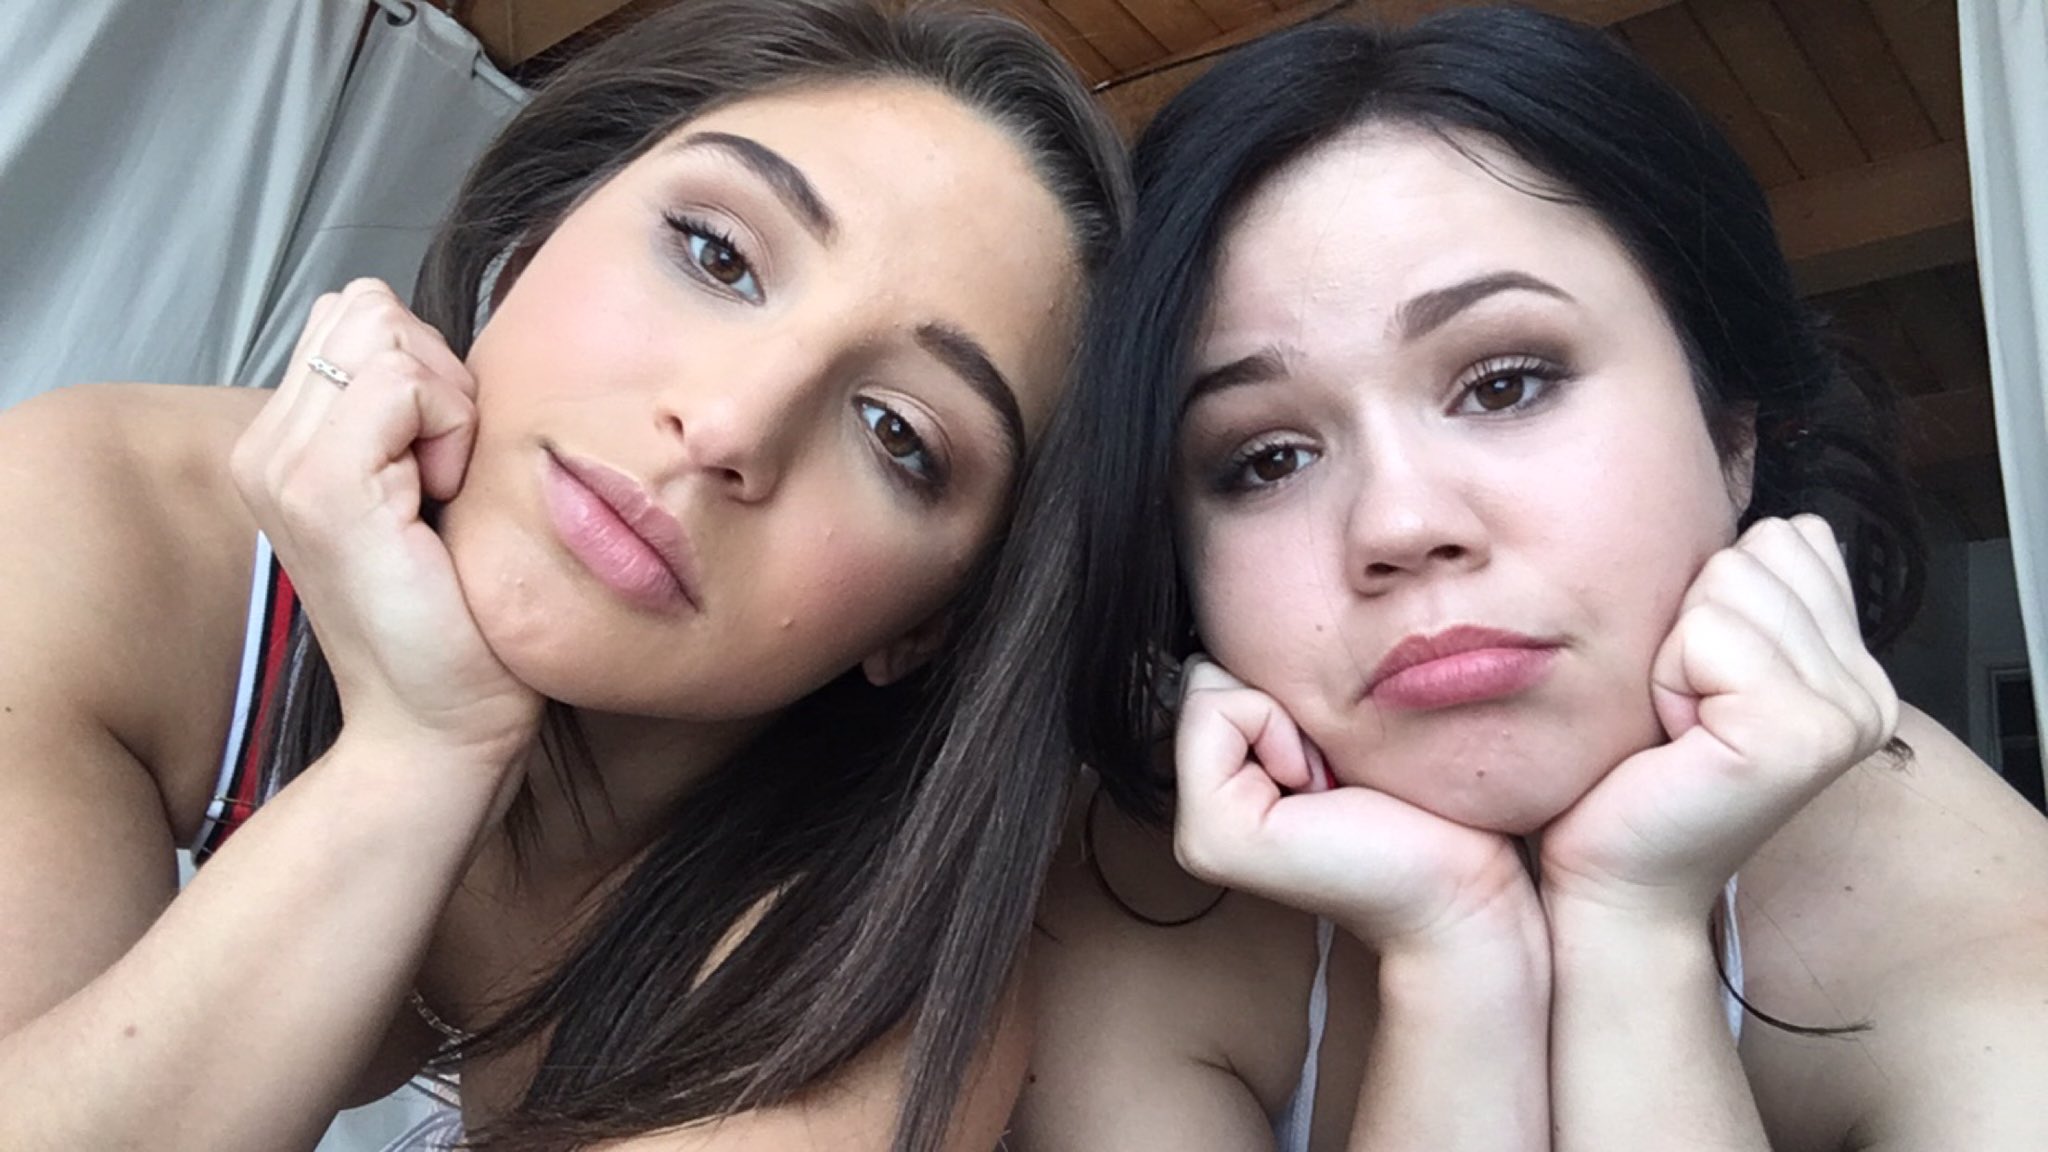 Abella Danger on Twitter: "Clearly @Yhivi is excited to smell my armpi...